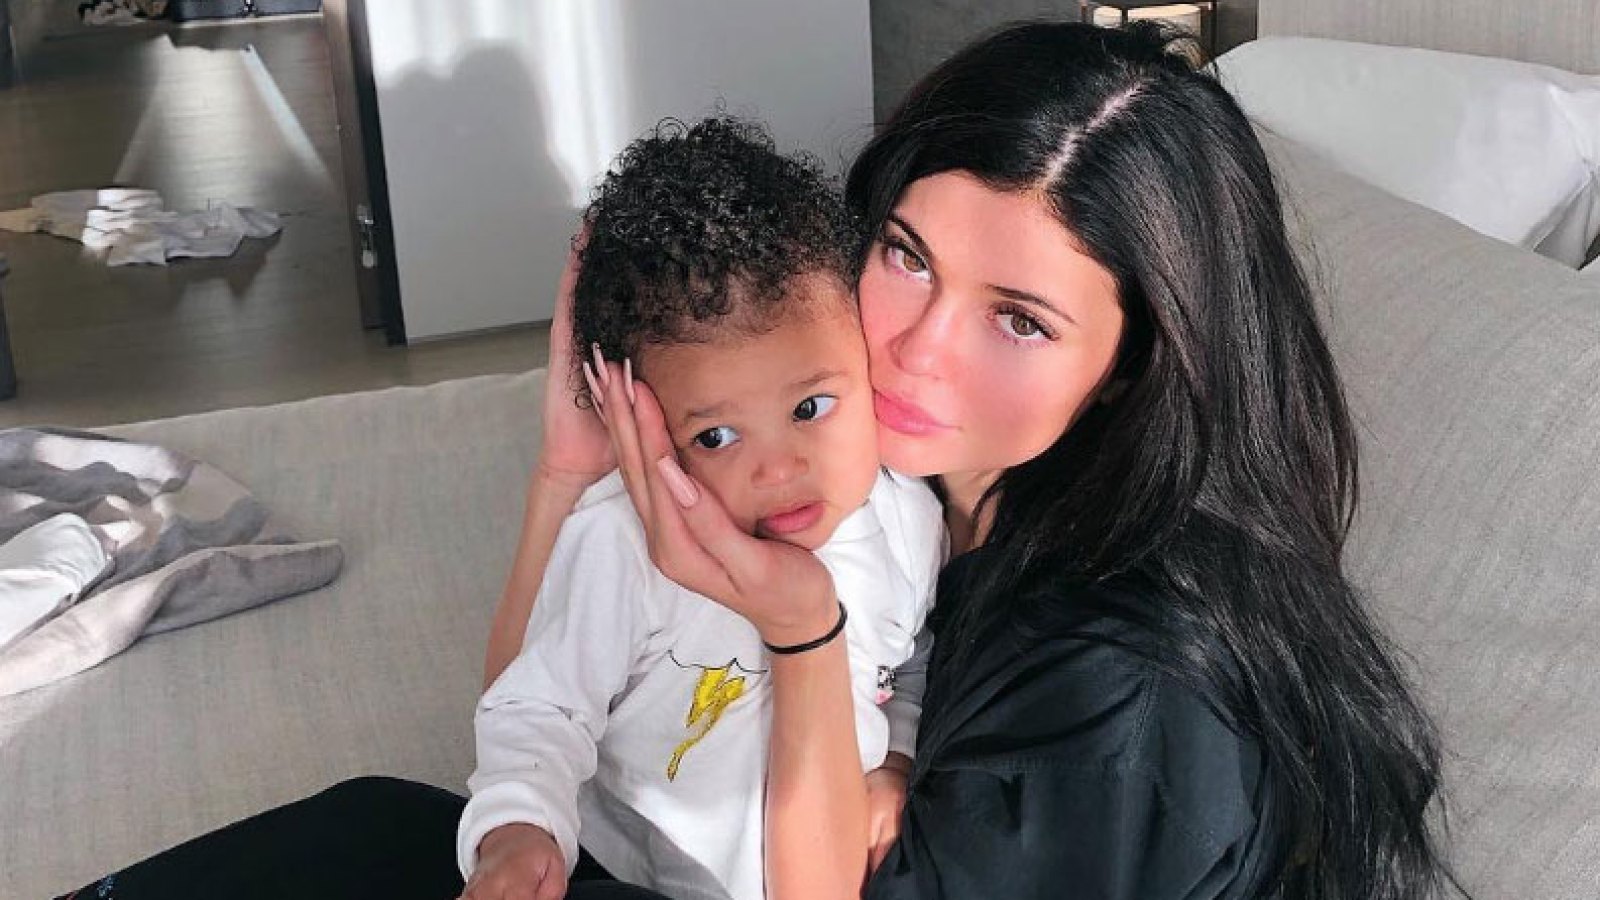 Kylie Jenner Shows Support for Travis Scott While Cuddling Stormi